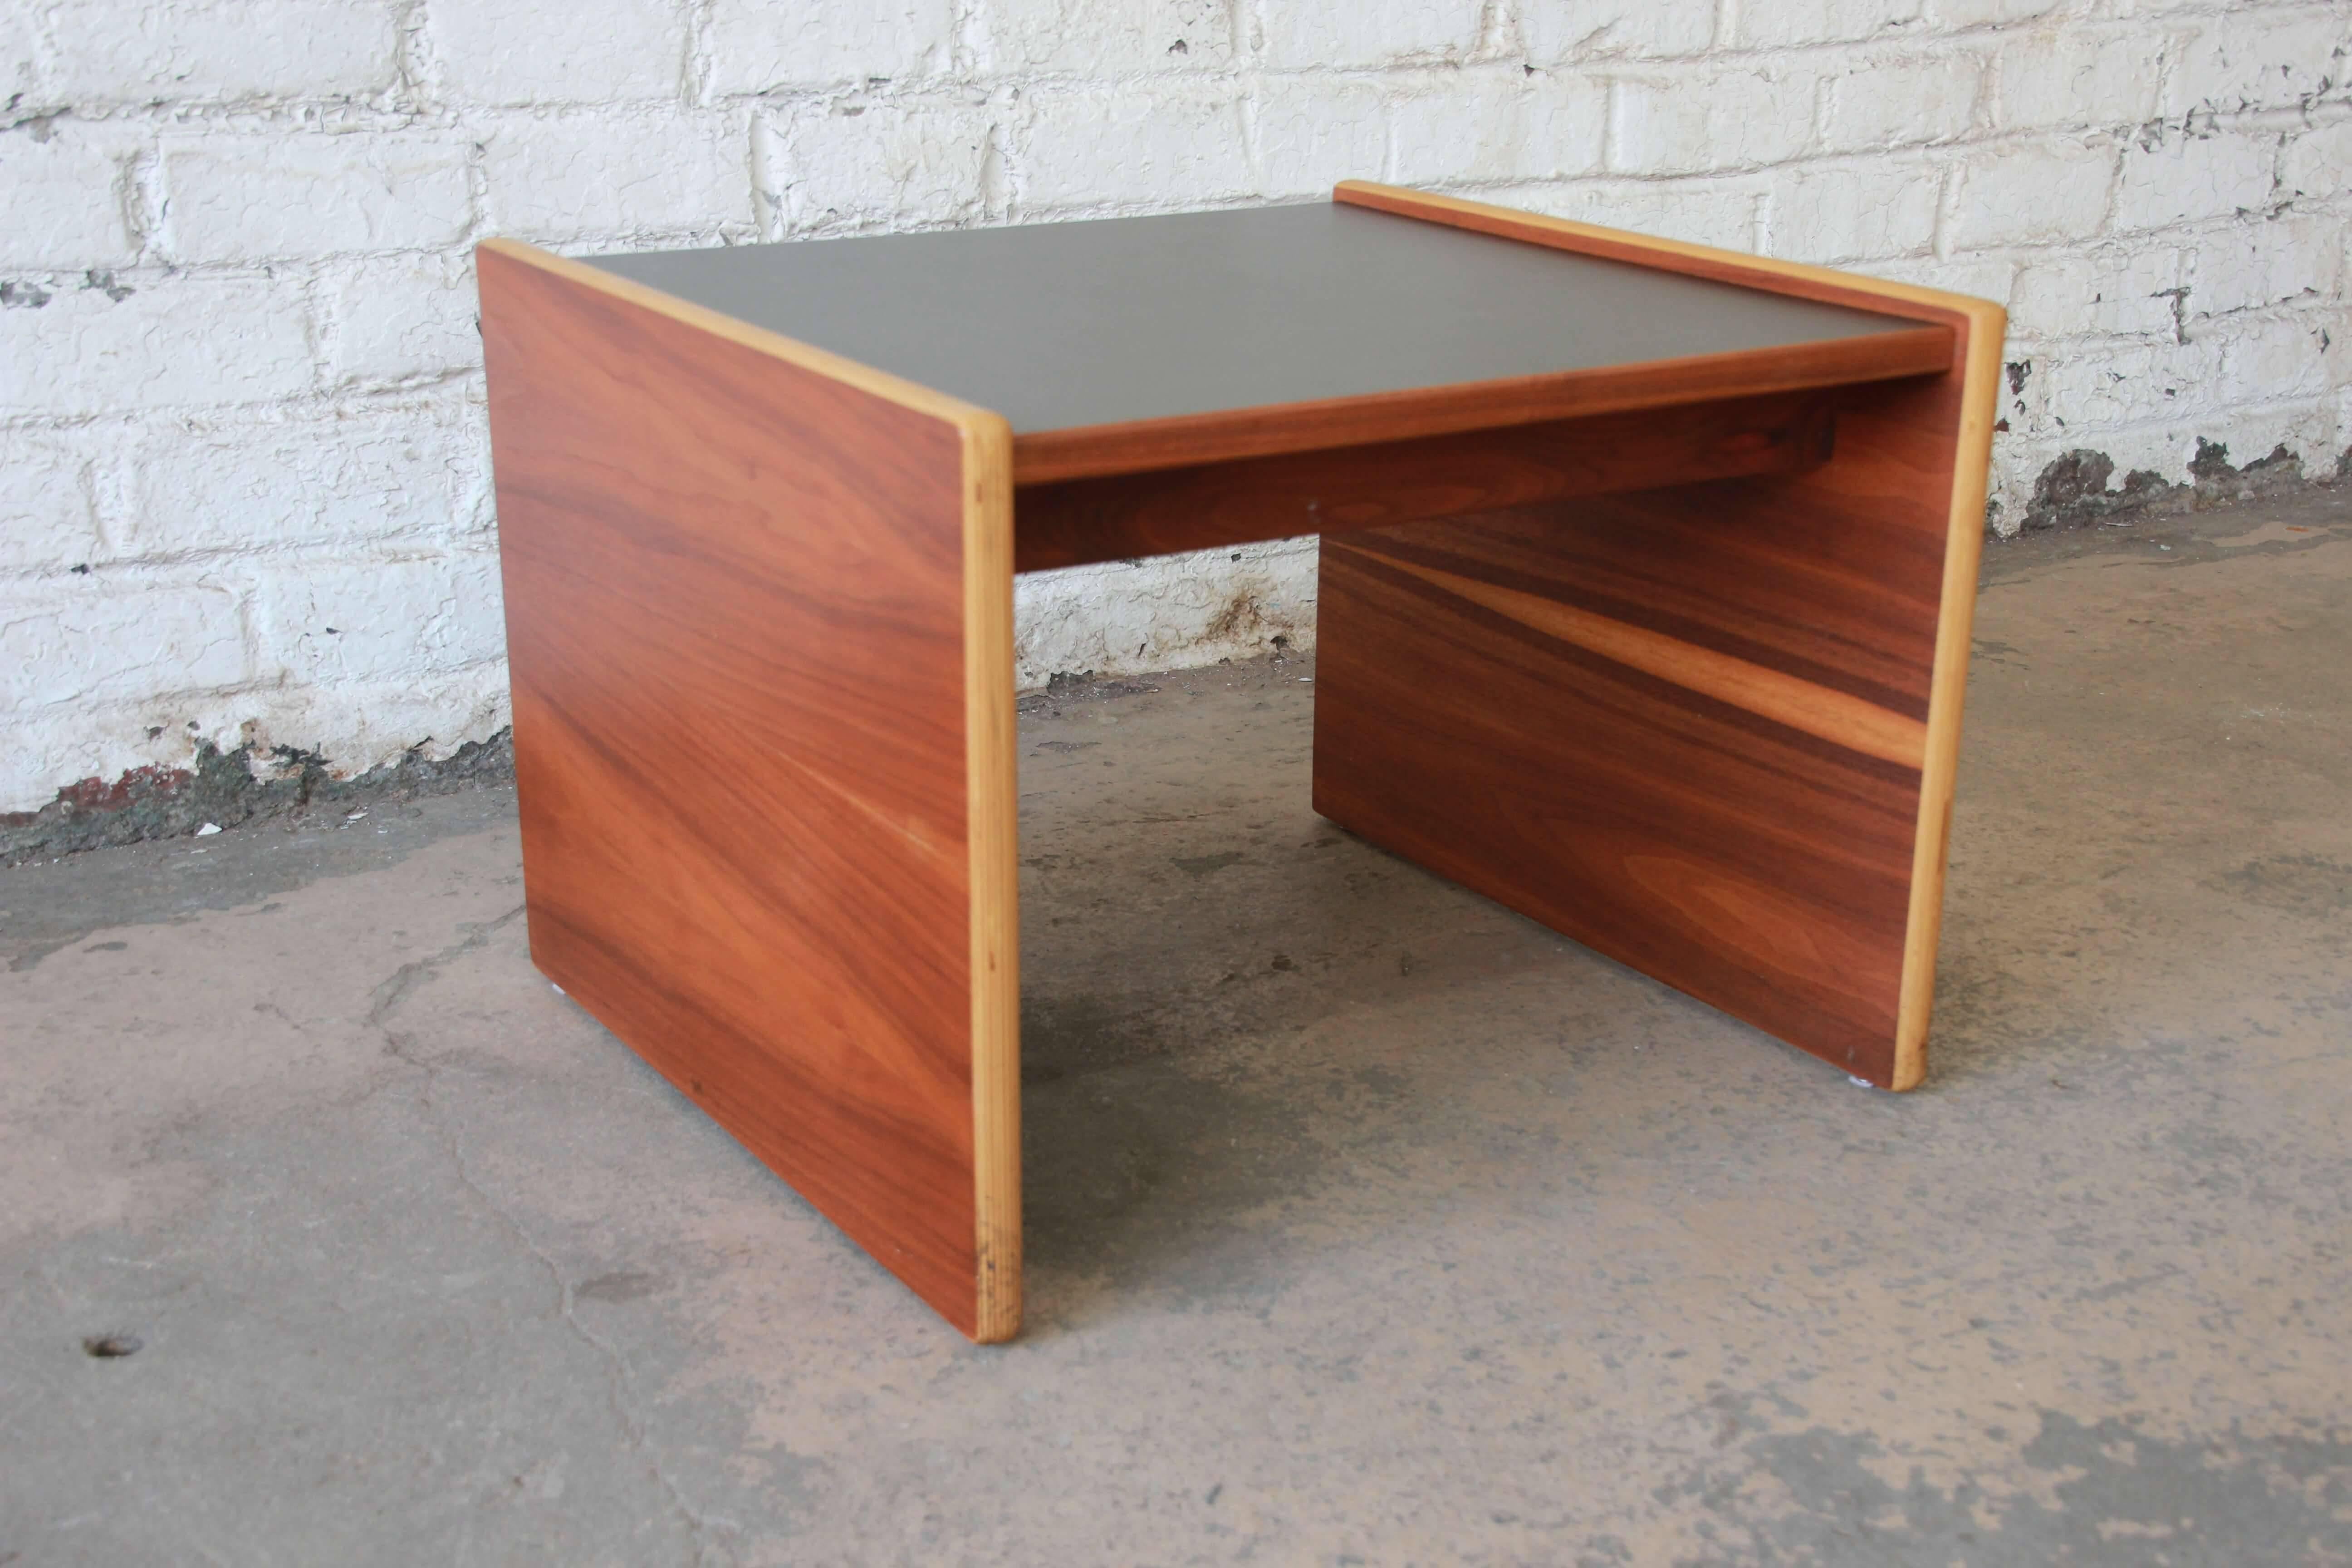 Offering a very nice and stylish Mid-Century Modern side table or bench by Jens Risom. The end table features a beautiful walnut wood grain on the legs that connect to a durable black laminate top. The table is in great vintage condition and is